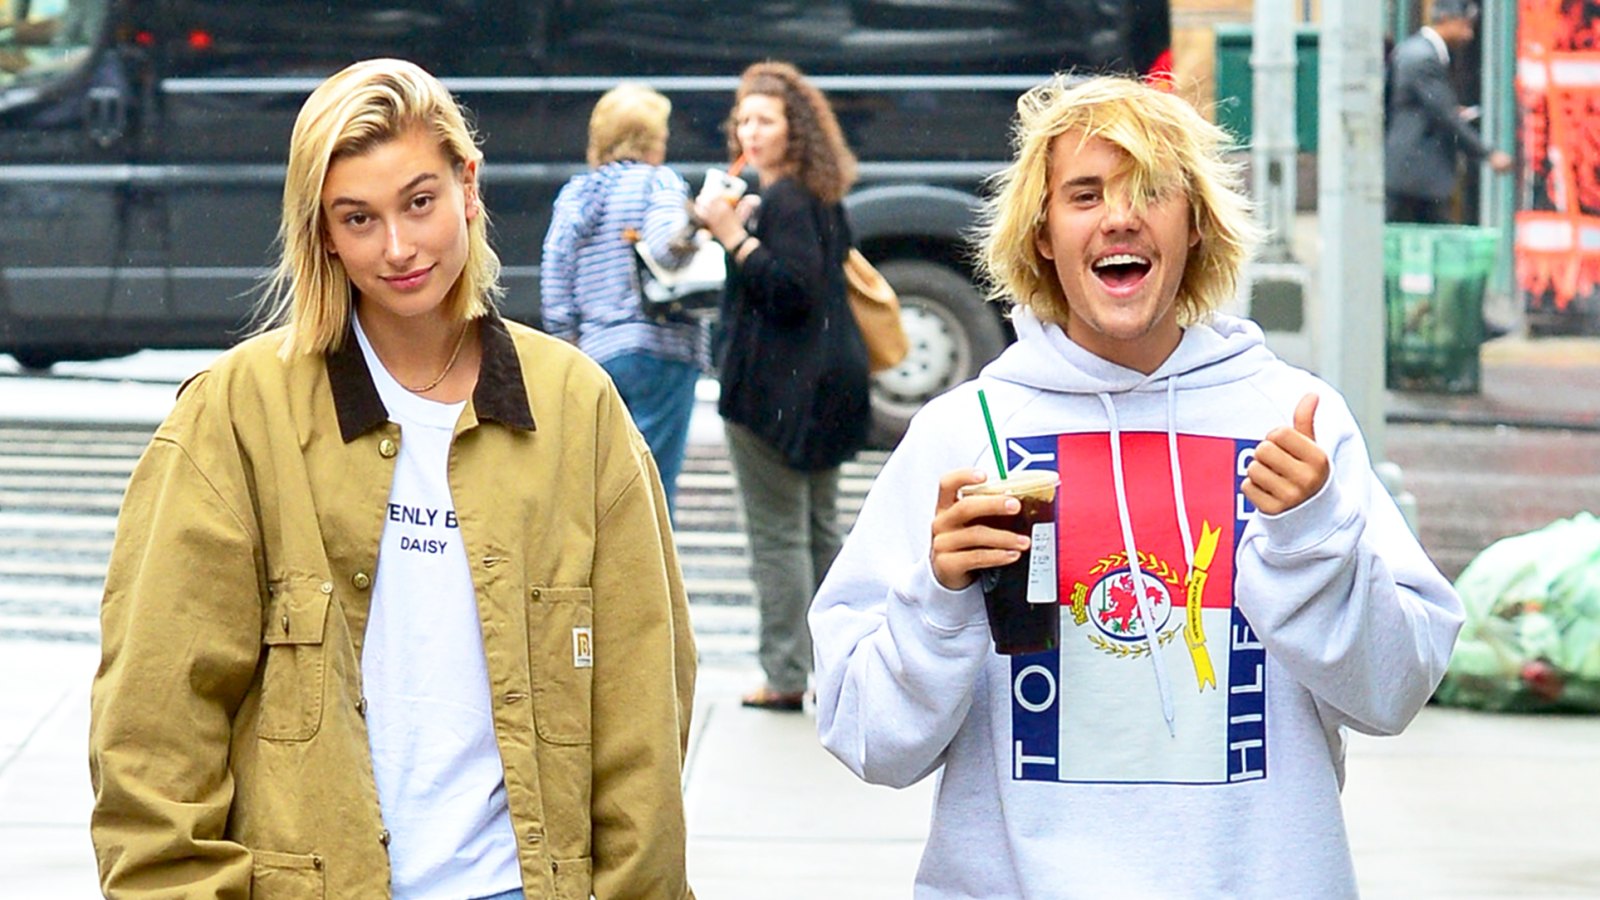 Justin Bieber and Hailey Baldwin go for walk in New York City on June 13, 2018.